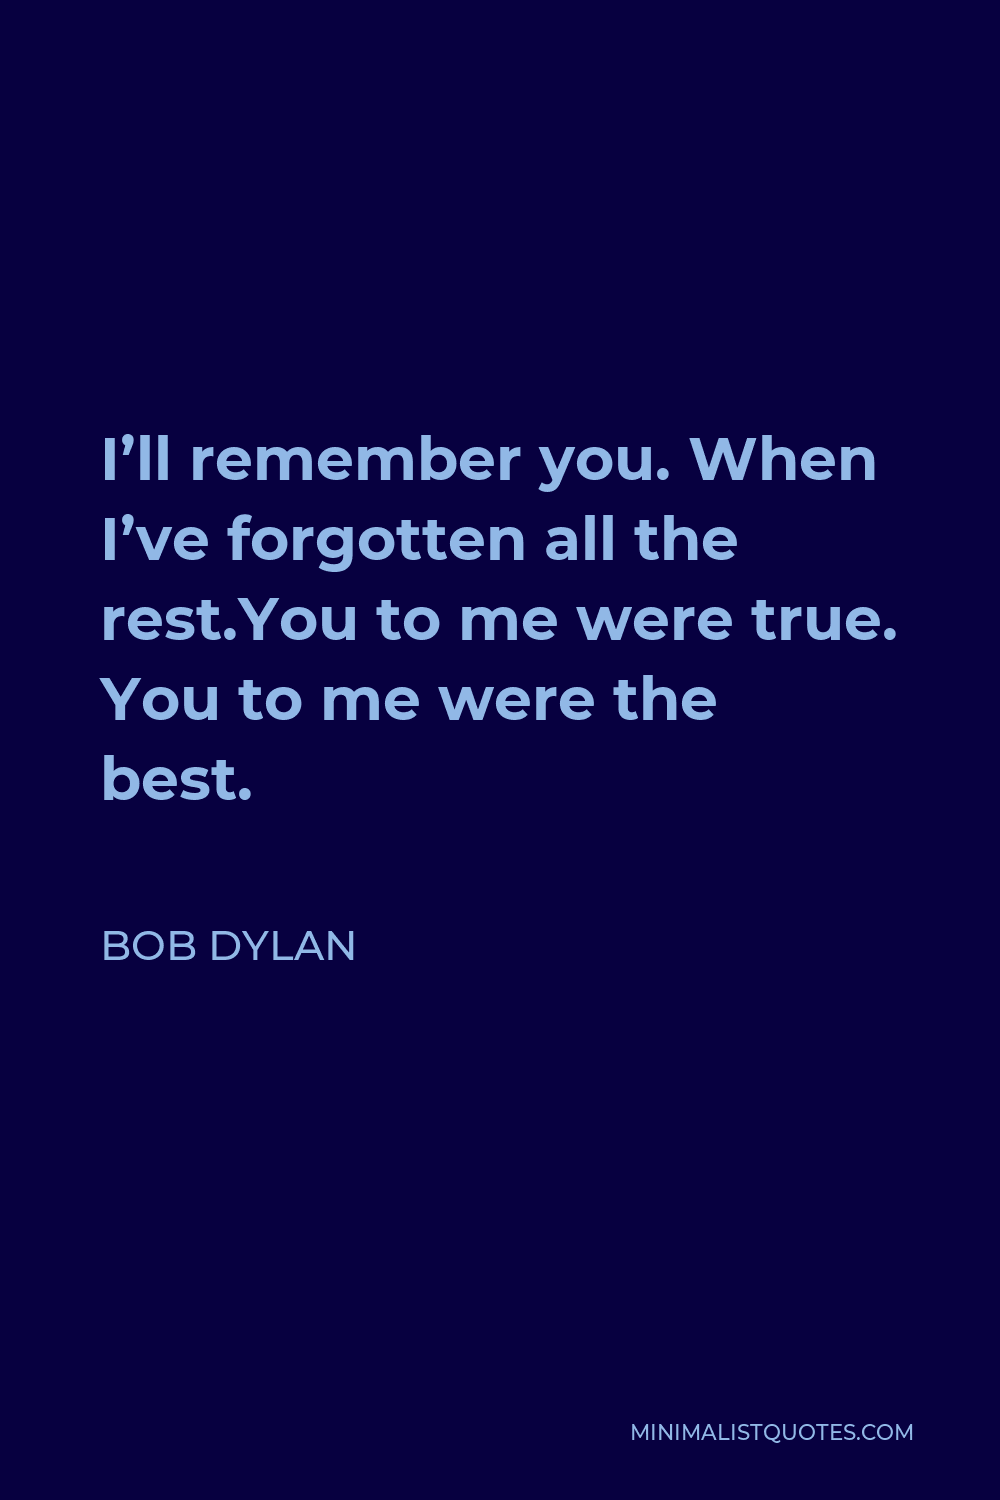 Bob Dylan Quote - I’ll remember you. When I’ve forgotten all the rest.You to me were true. You to me were the best.